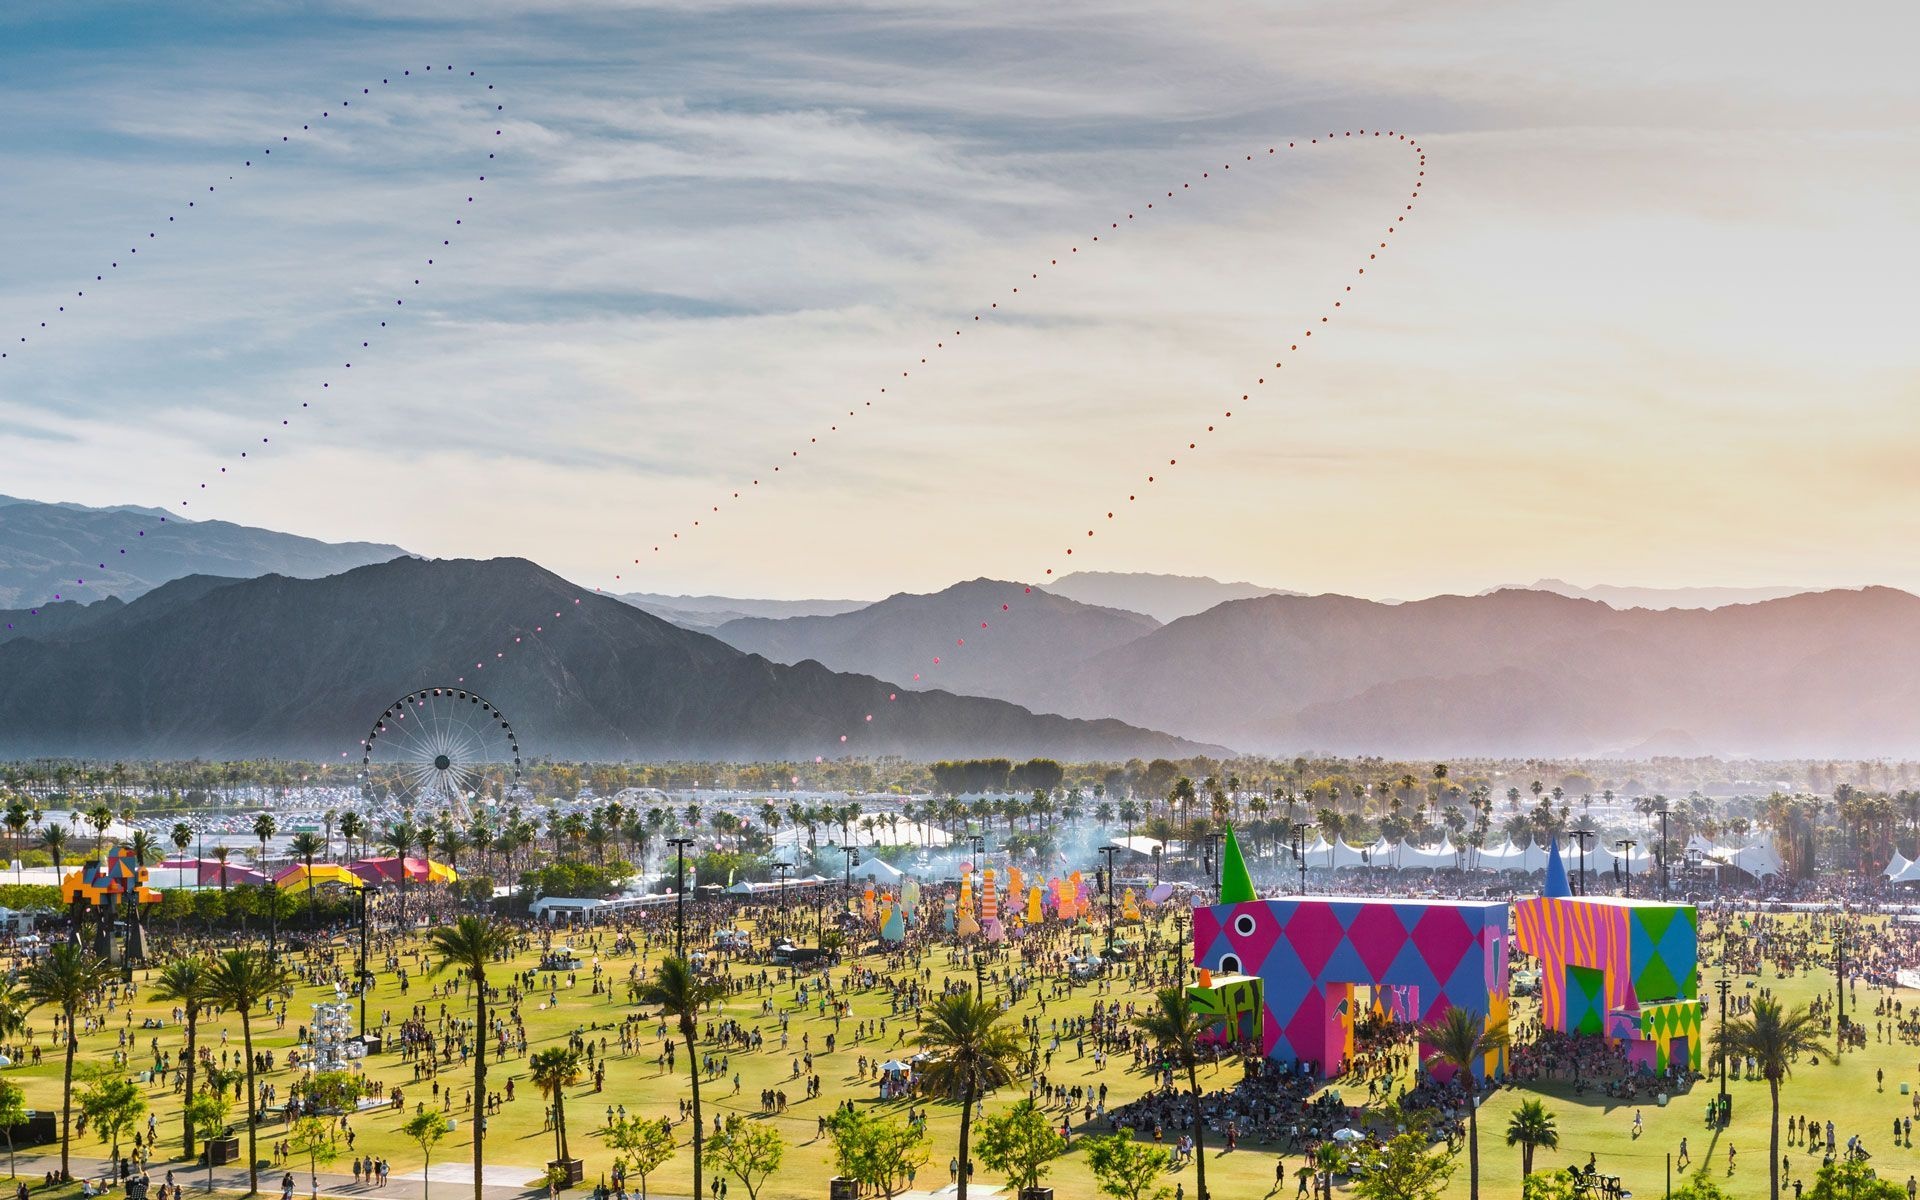 Coachella: The event features musical artists from many genres of music, including rock, pop, indie, hip hop and electronic dance music. 1920x1200 HD Background.